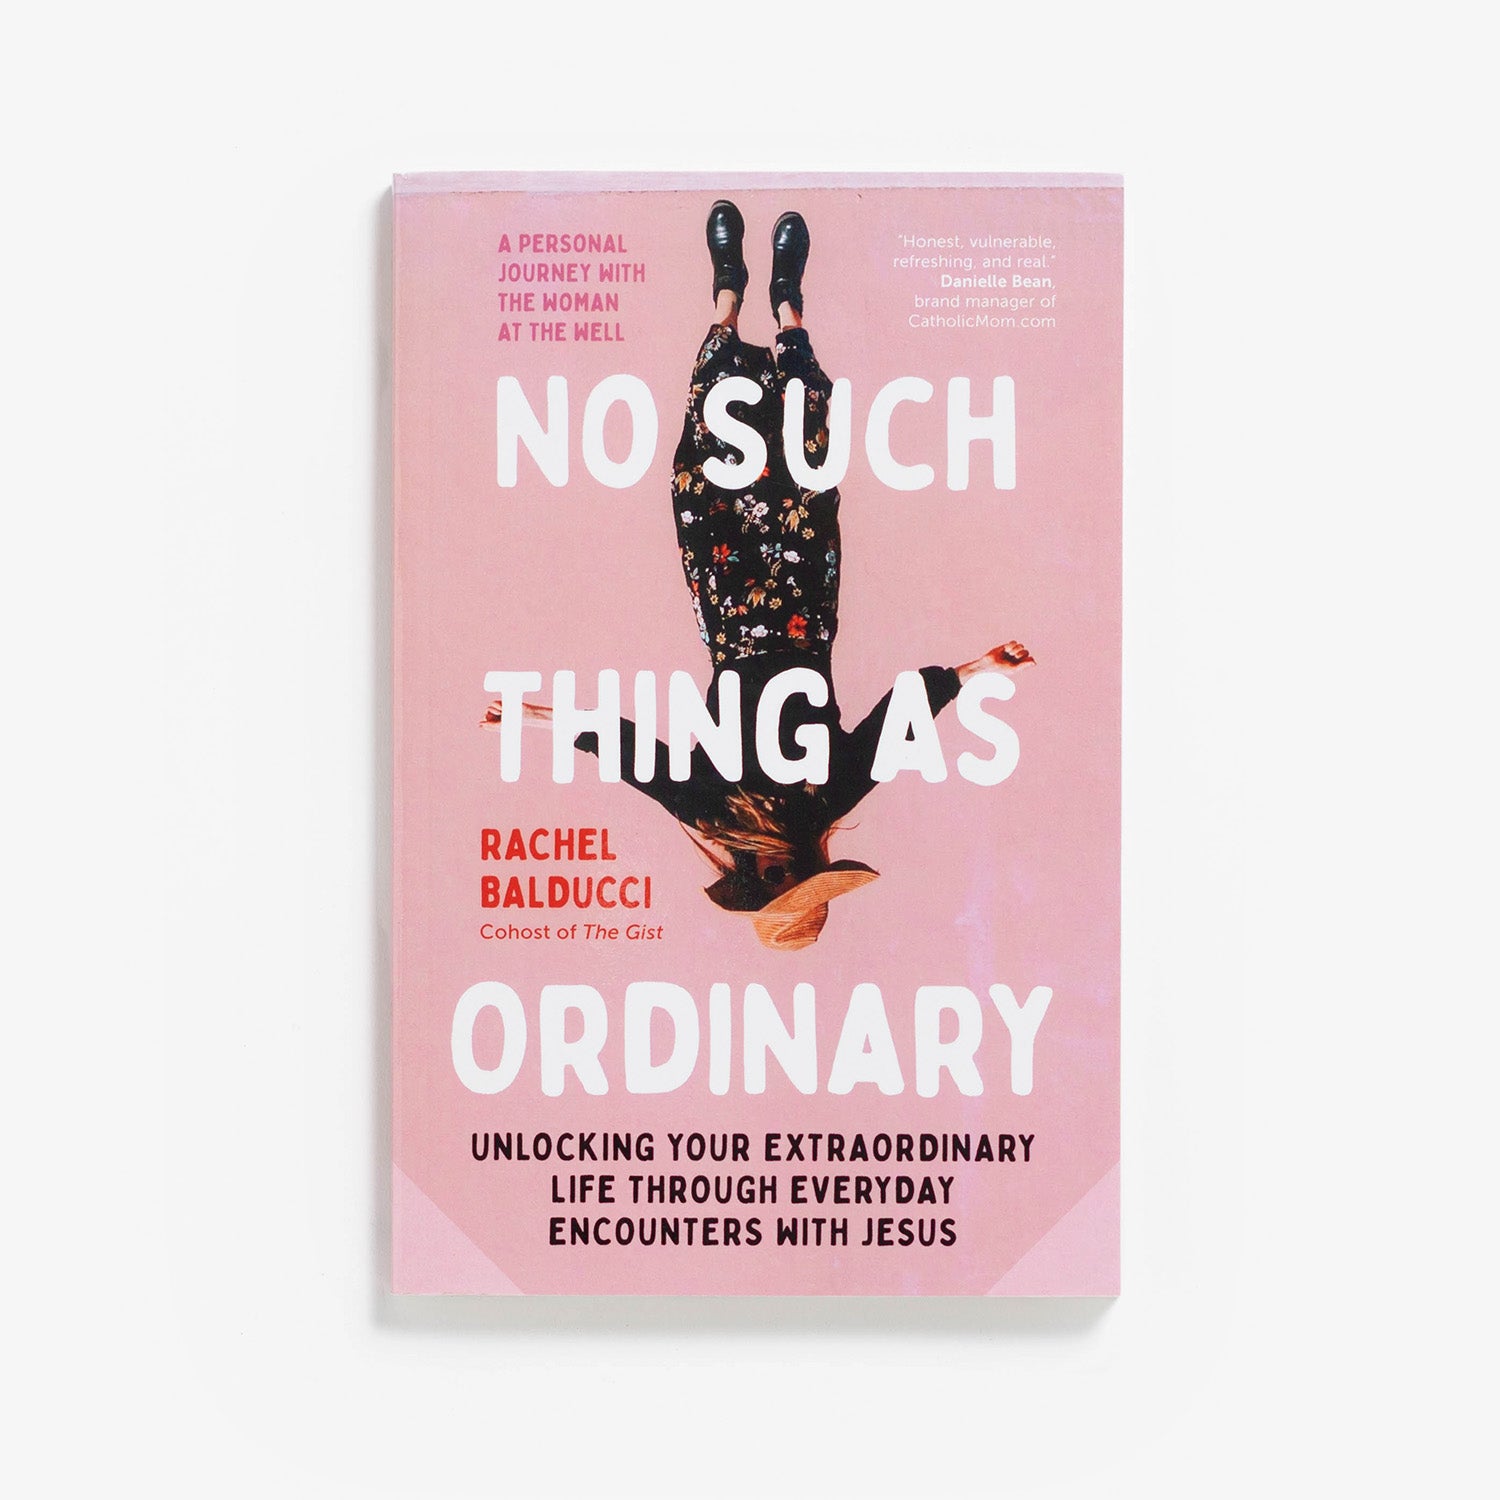 No Such Thing as Ordinary: Unlocking Your Extraordinary Life through Everyday Encounters with Jesus